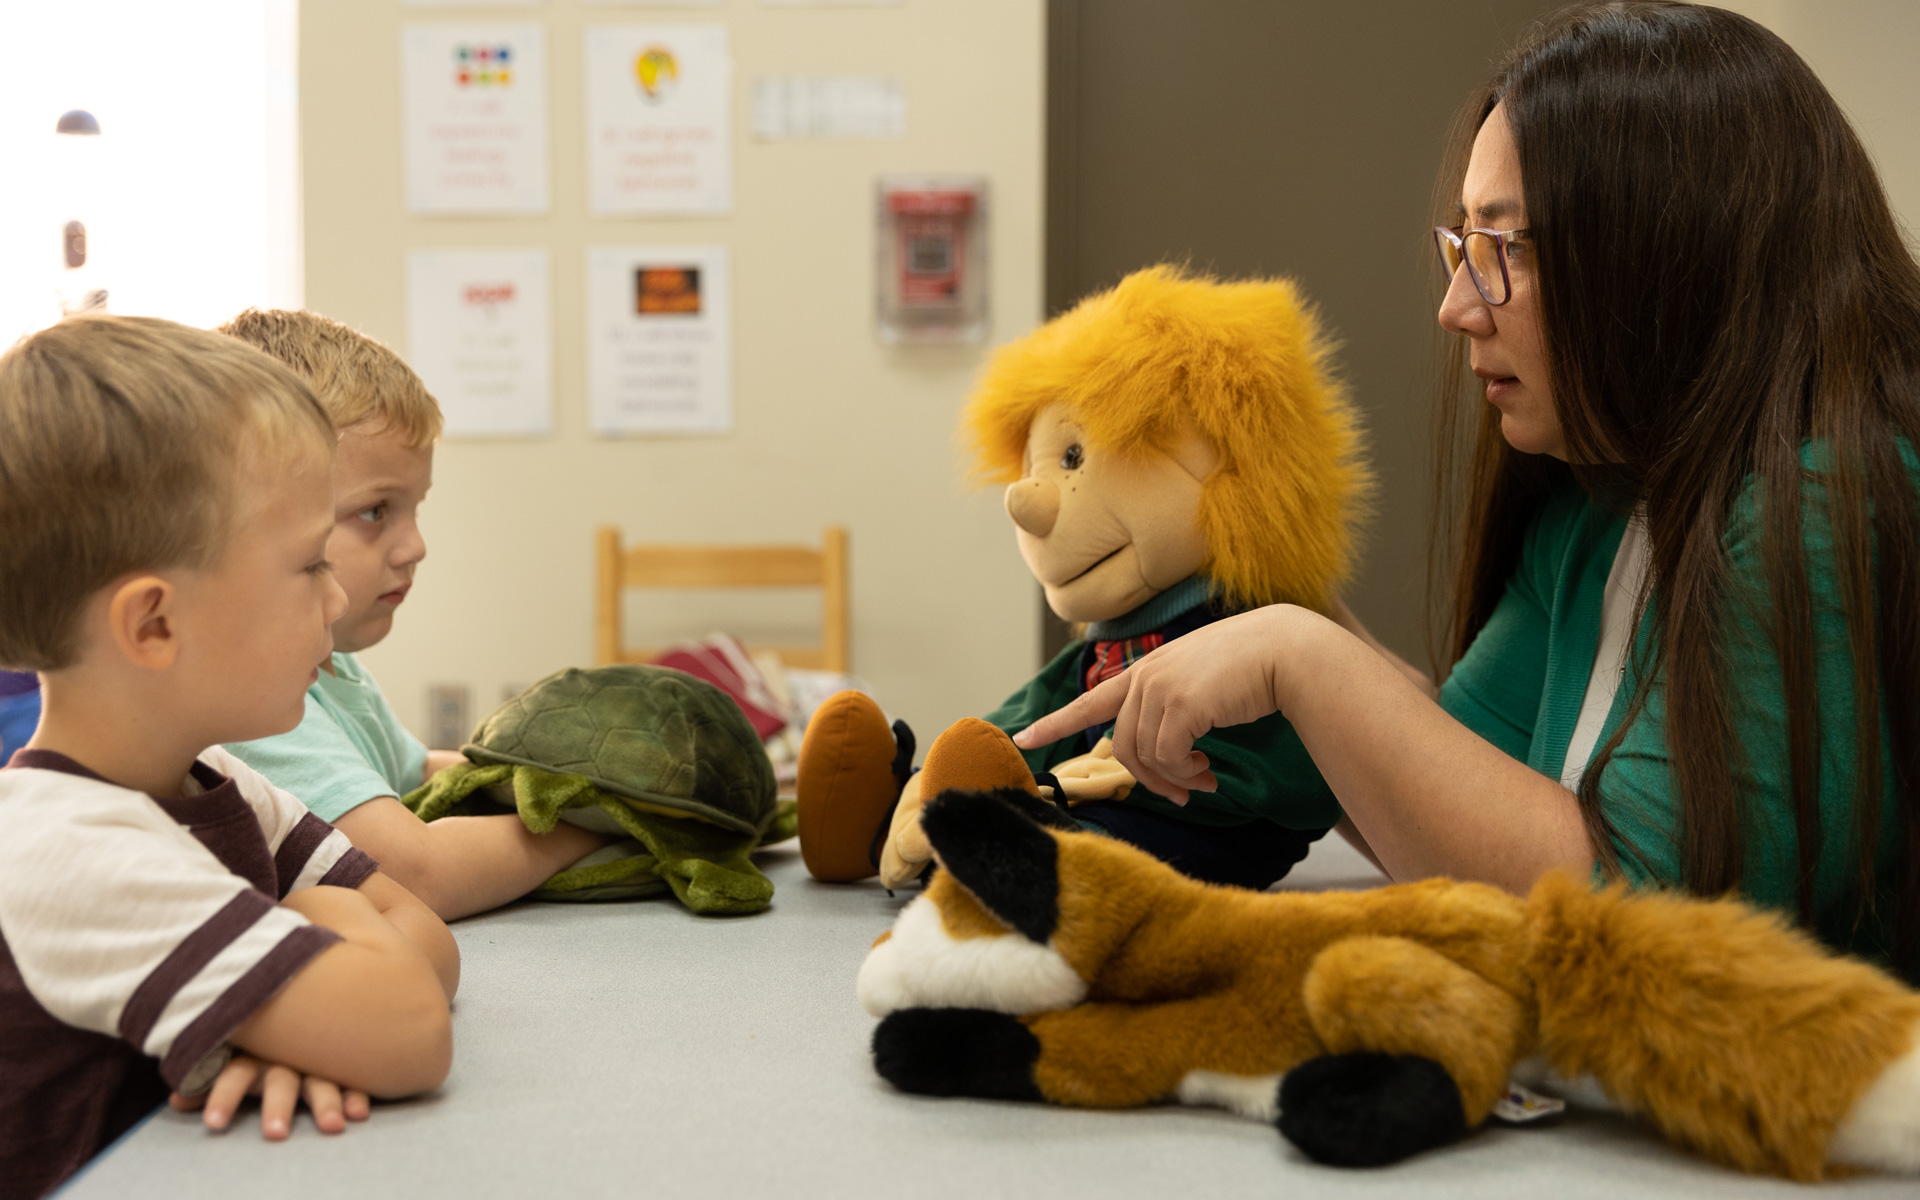 Member of staff playing with puppets with two kids